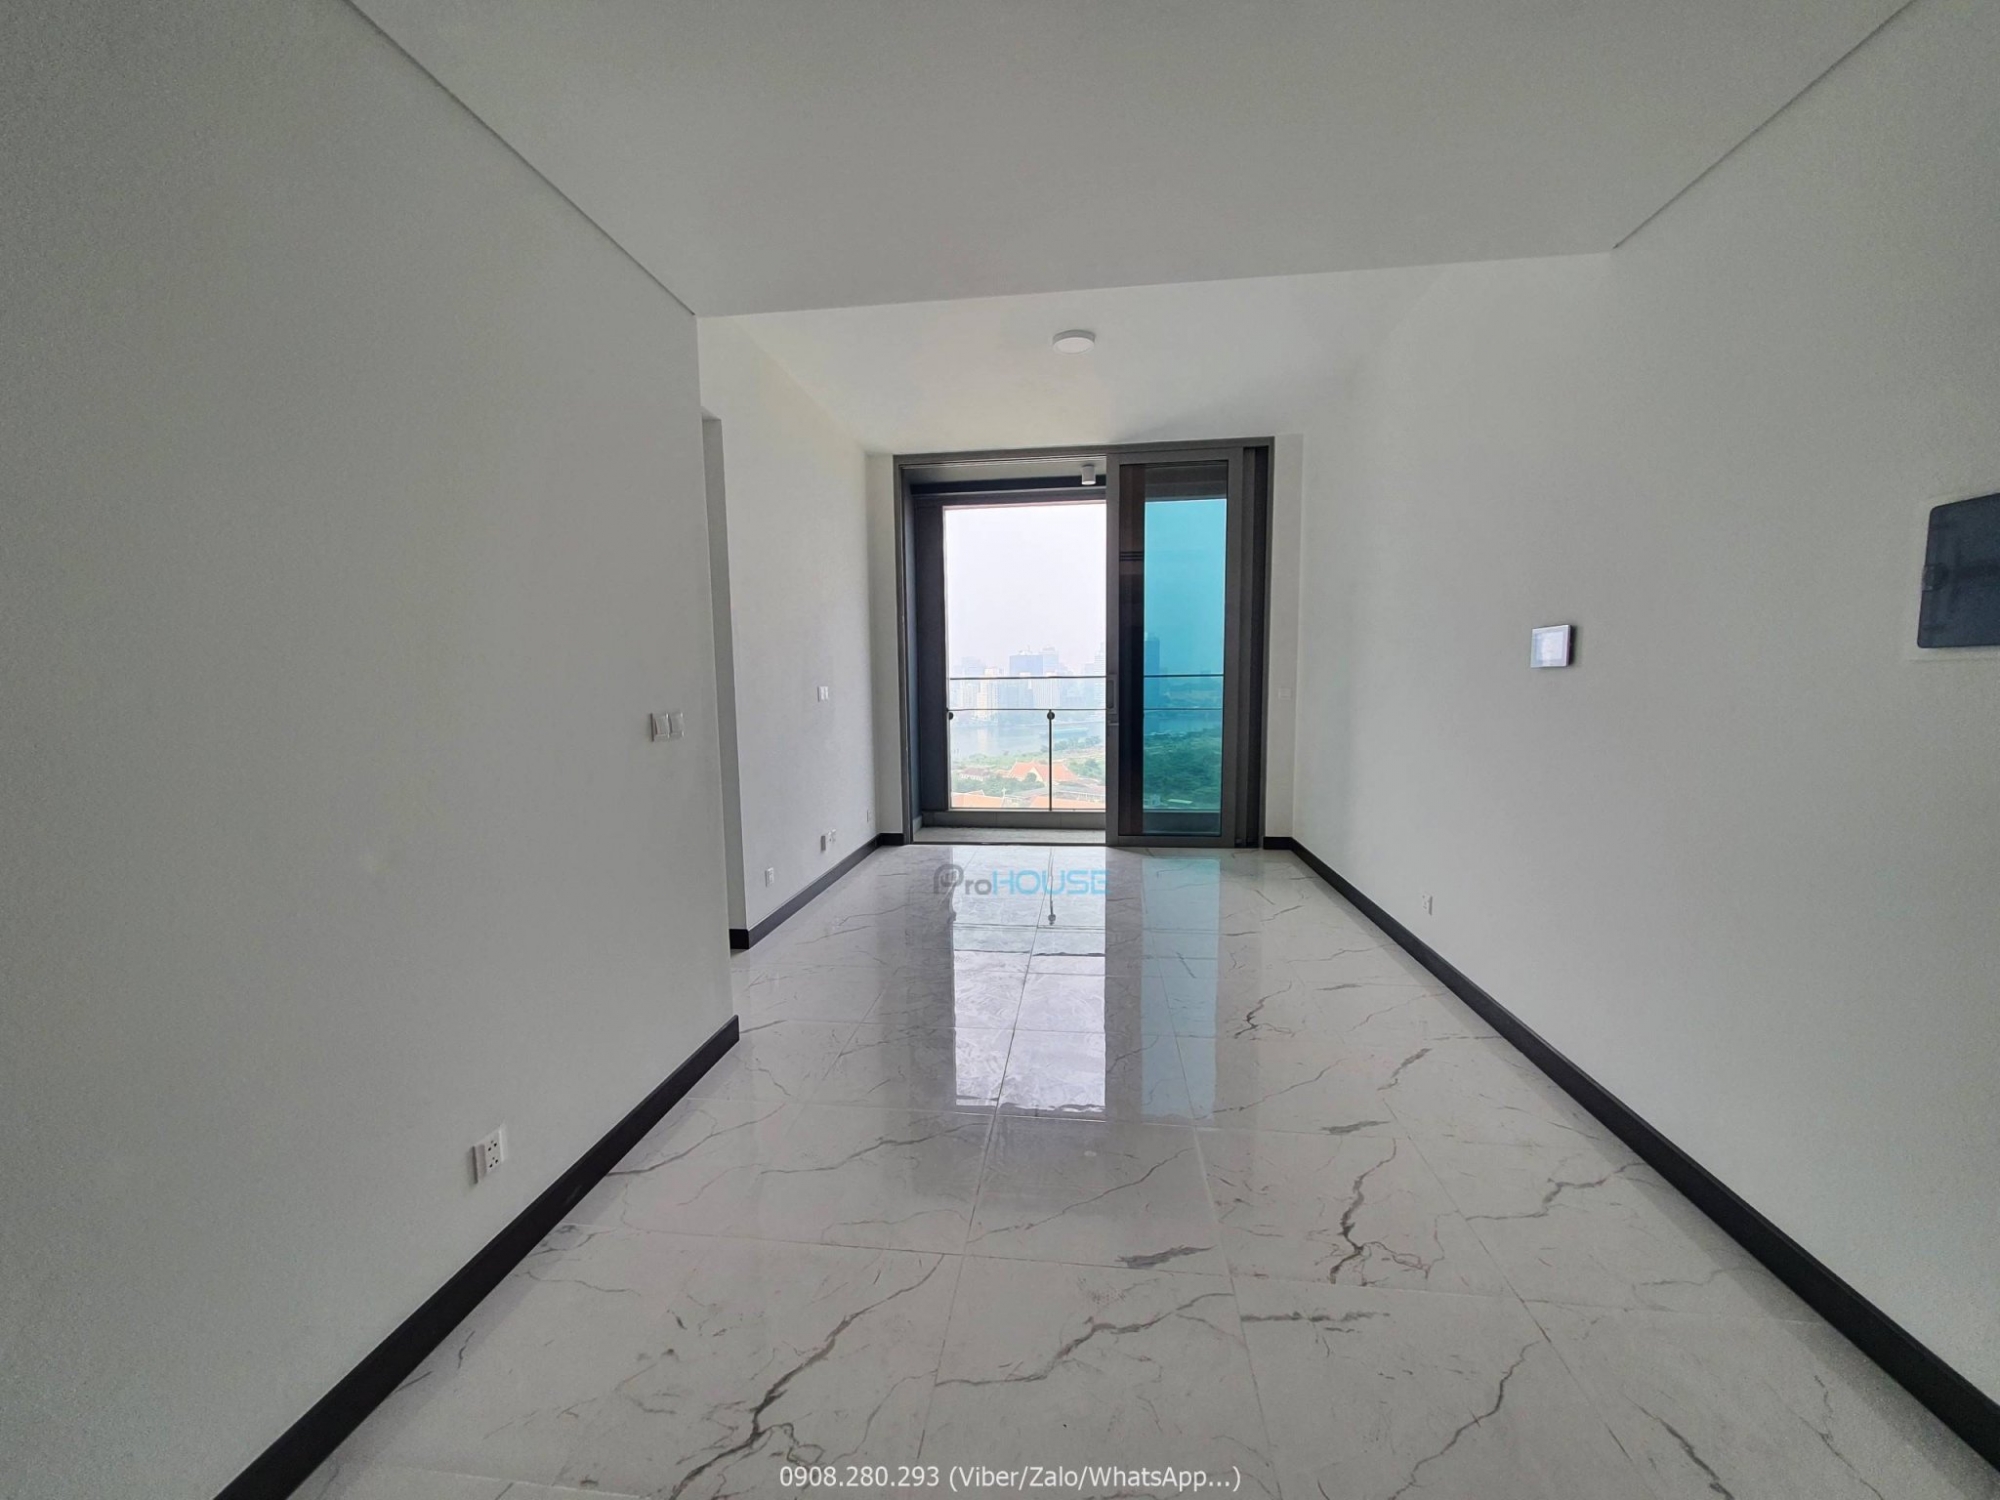 Urgent 1 bedroom apartment for rent in Empire City with beautiful view